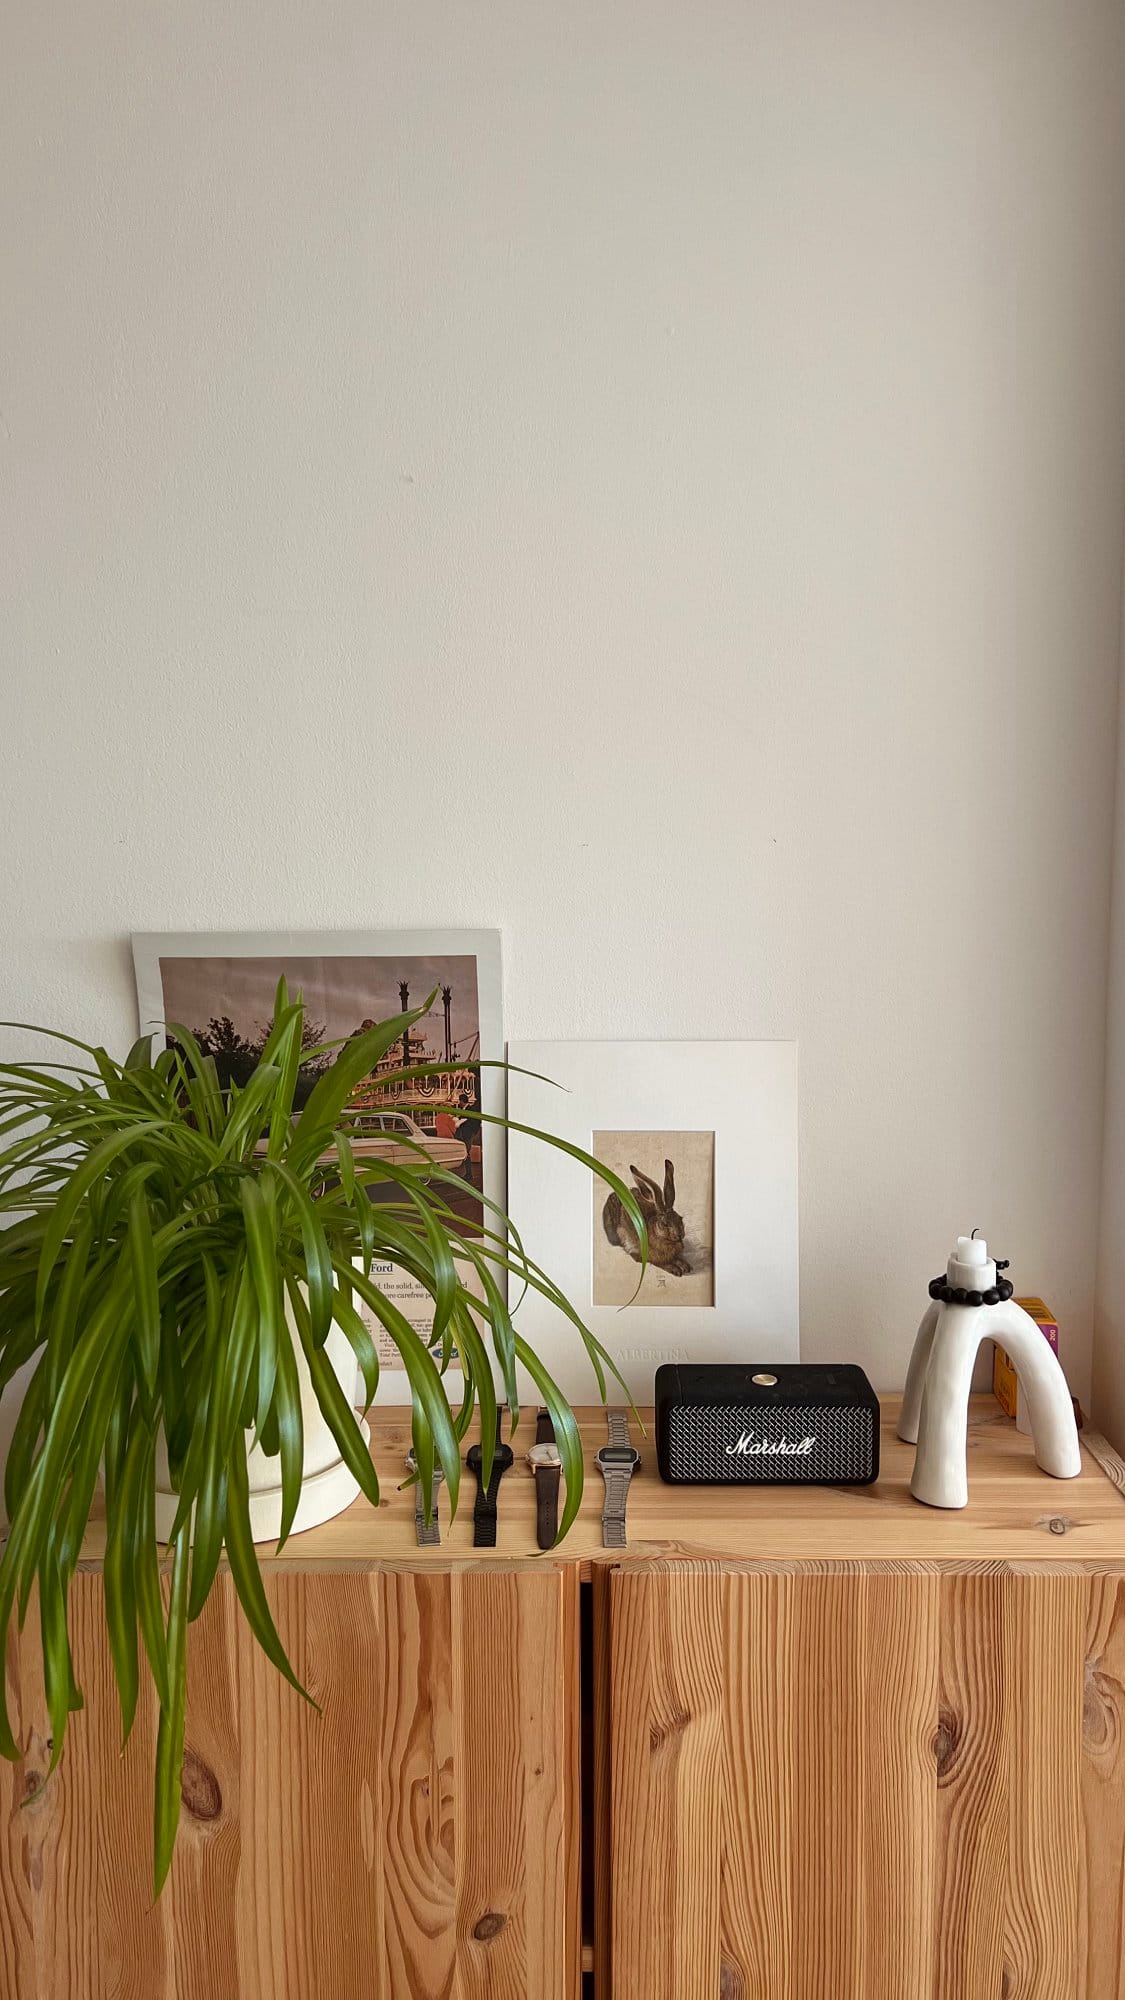 A wooden cabinet topped with a potted spider plant, several smartwatch bands, a Marshall portable speaker, a candle holder, and framed art prints leaning against the wall